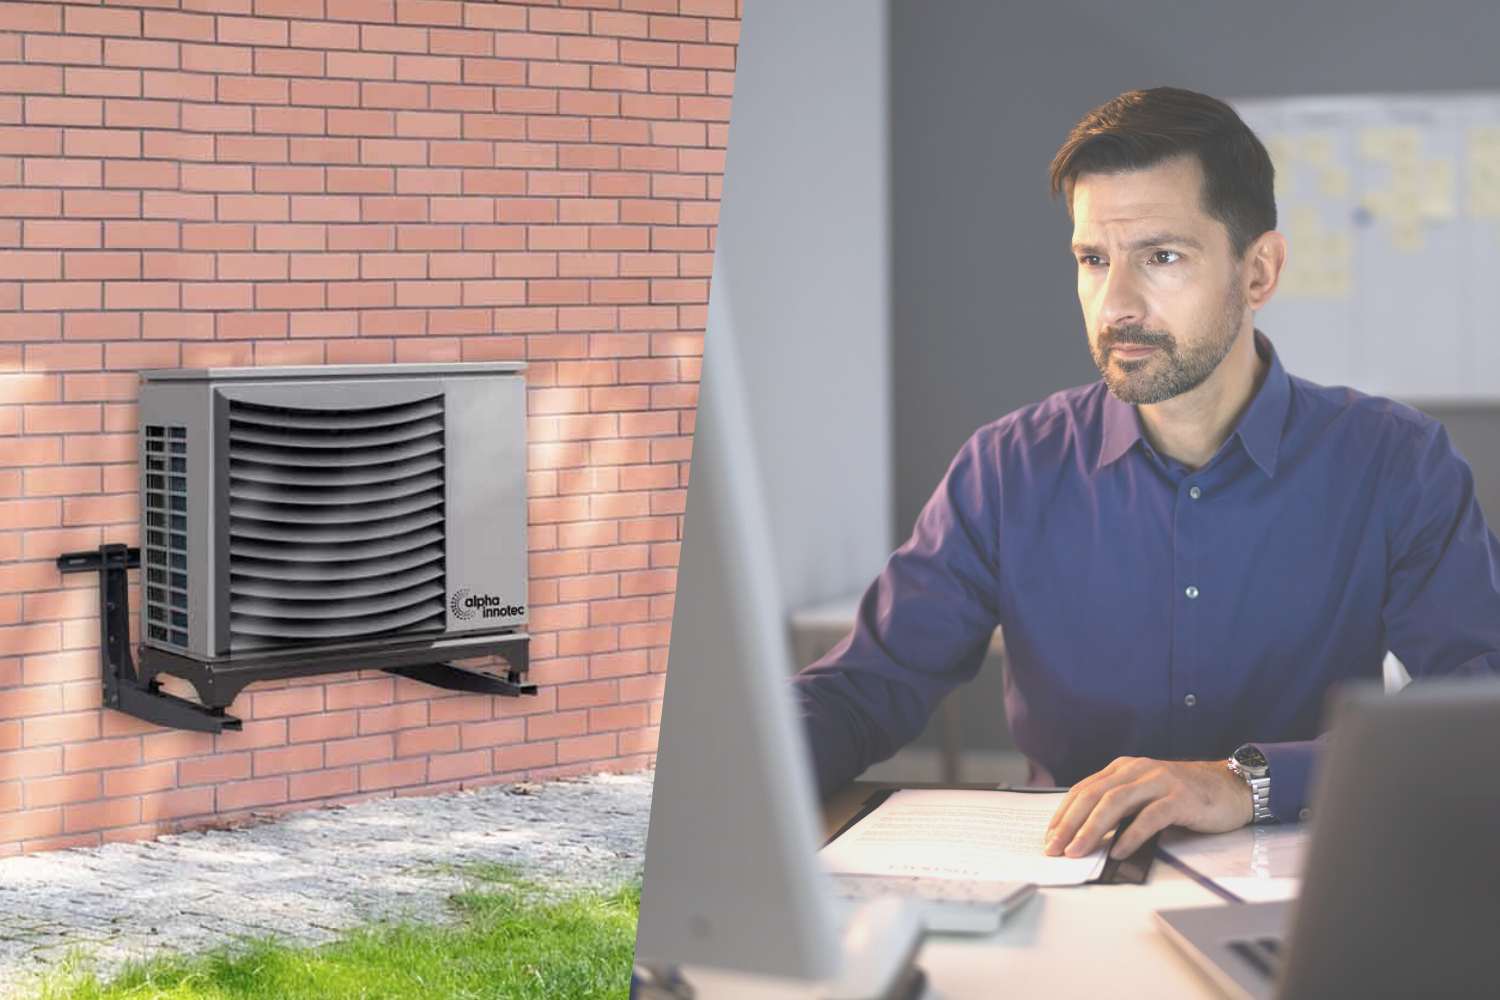 The photo is divided into left and right as on the left, there is a heat pump installed on a wall and on the right side, there sits a man working on a laptop. 